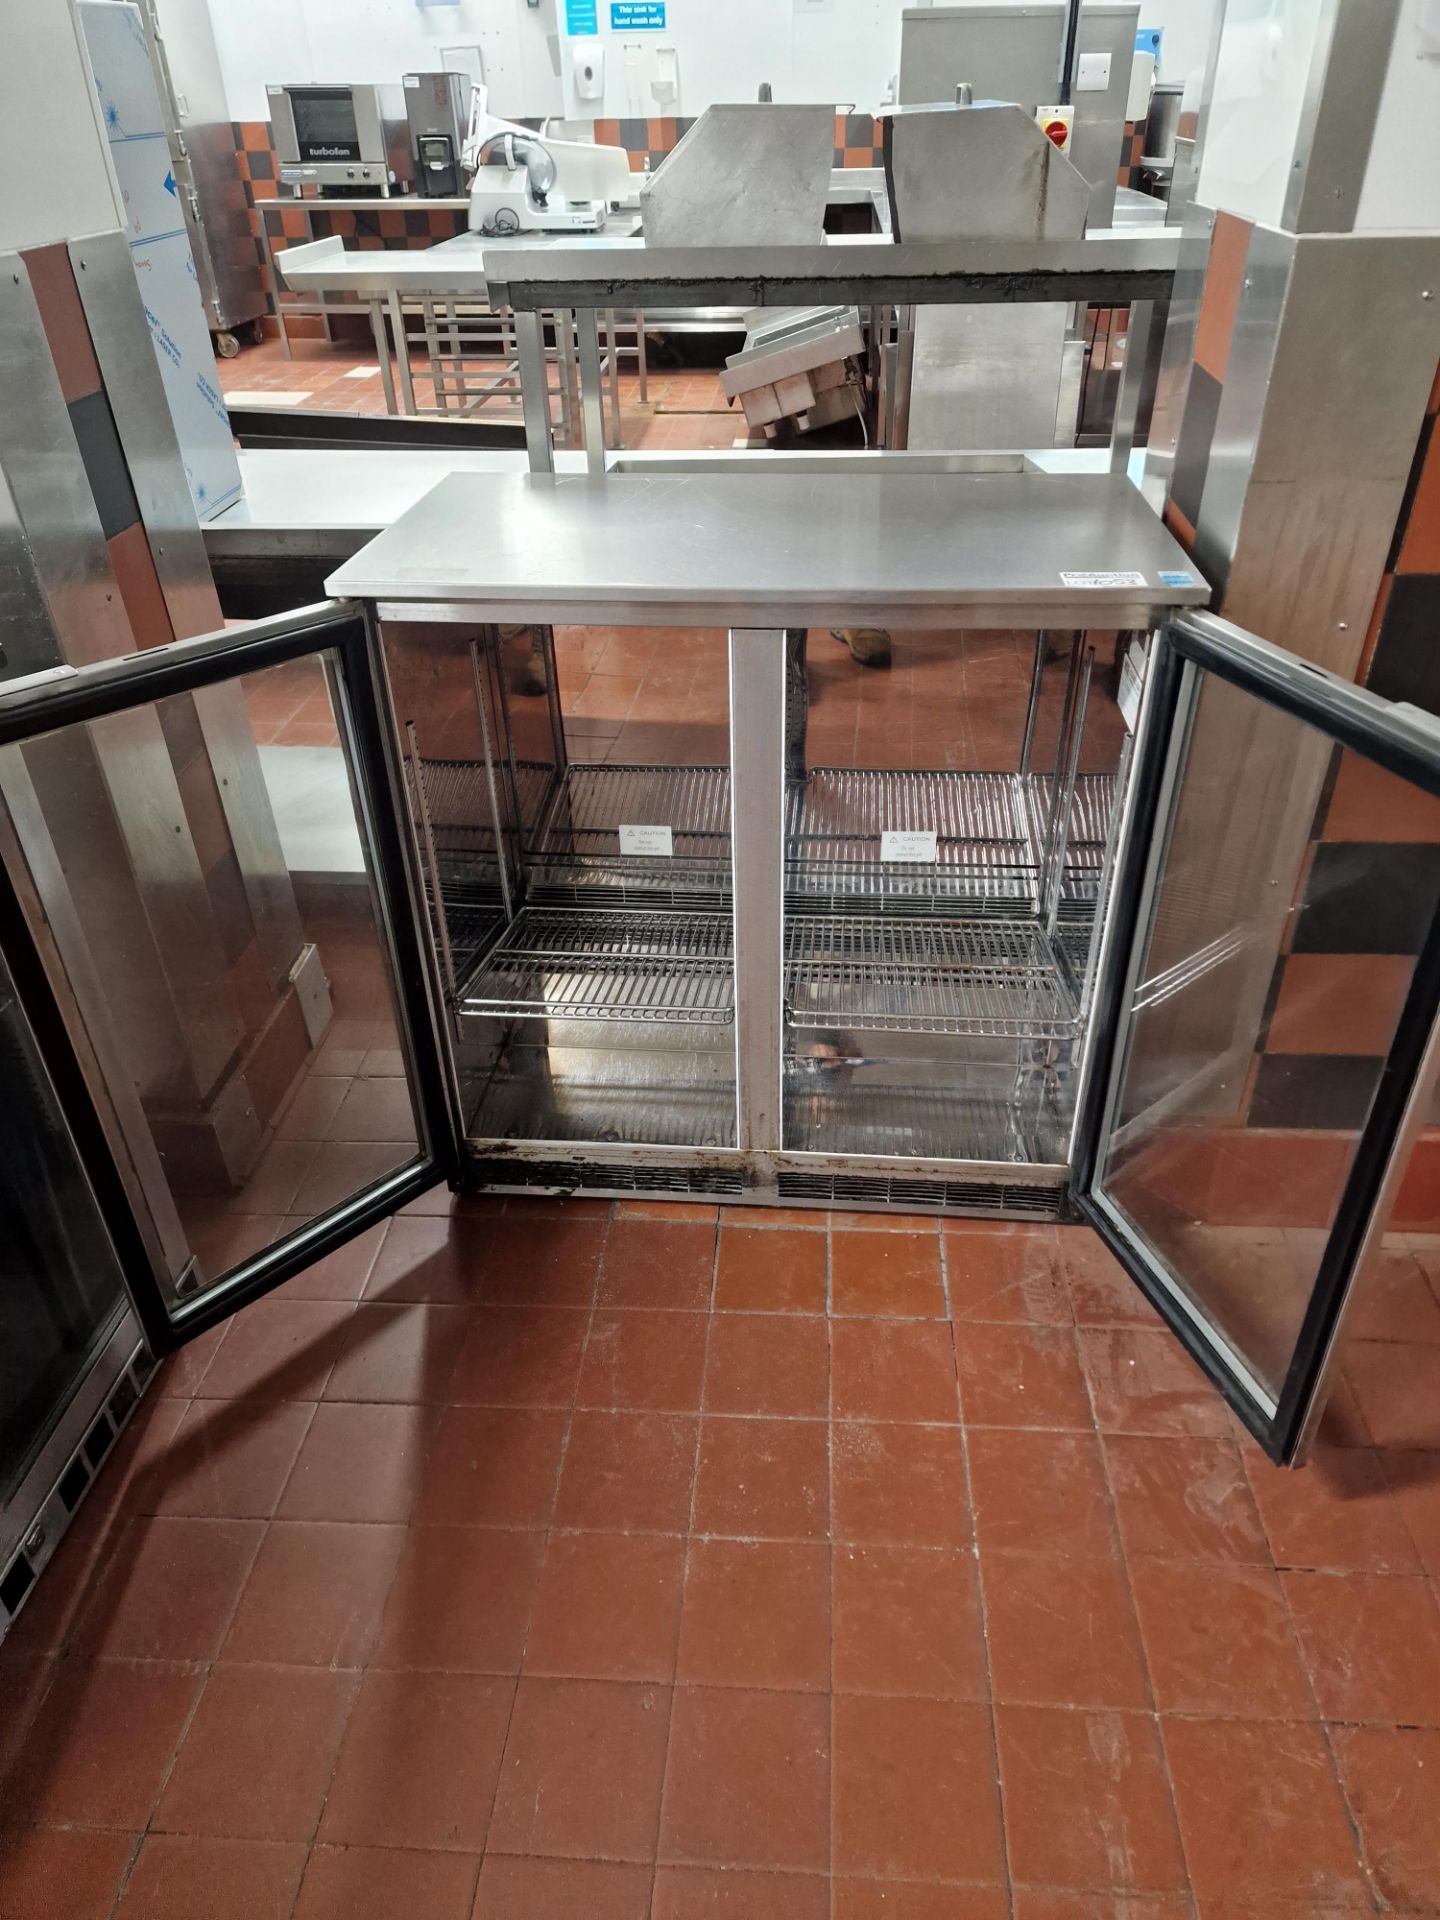 IMC Mistral M90 Bottle Cooler Glass Door Stainless Steel With Interior LED Lighting Temperature - Image 2 of 3